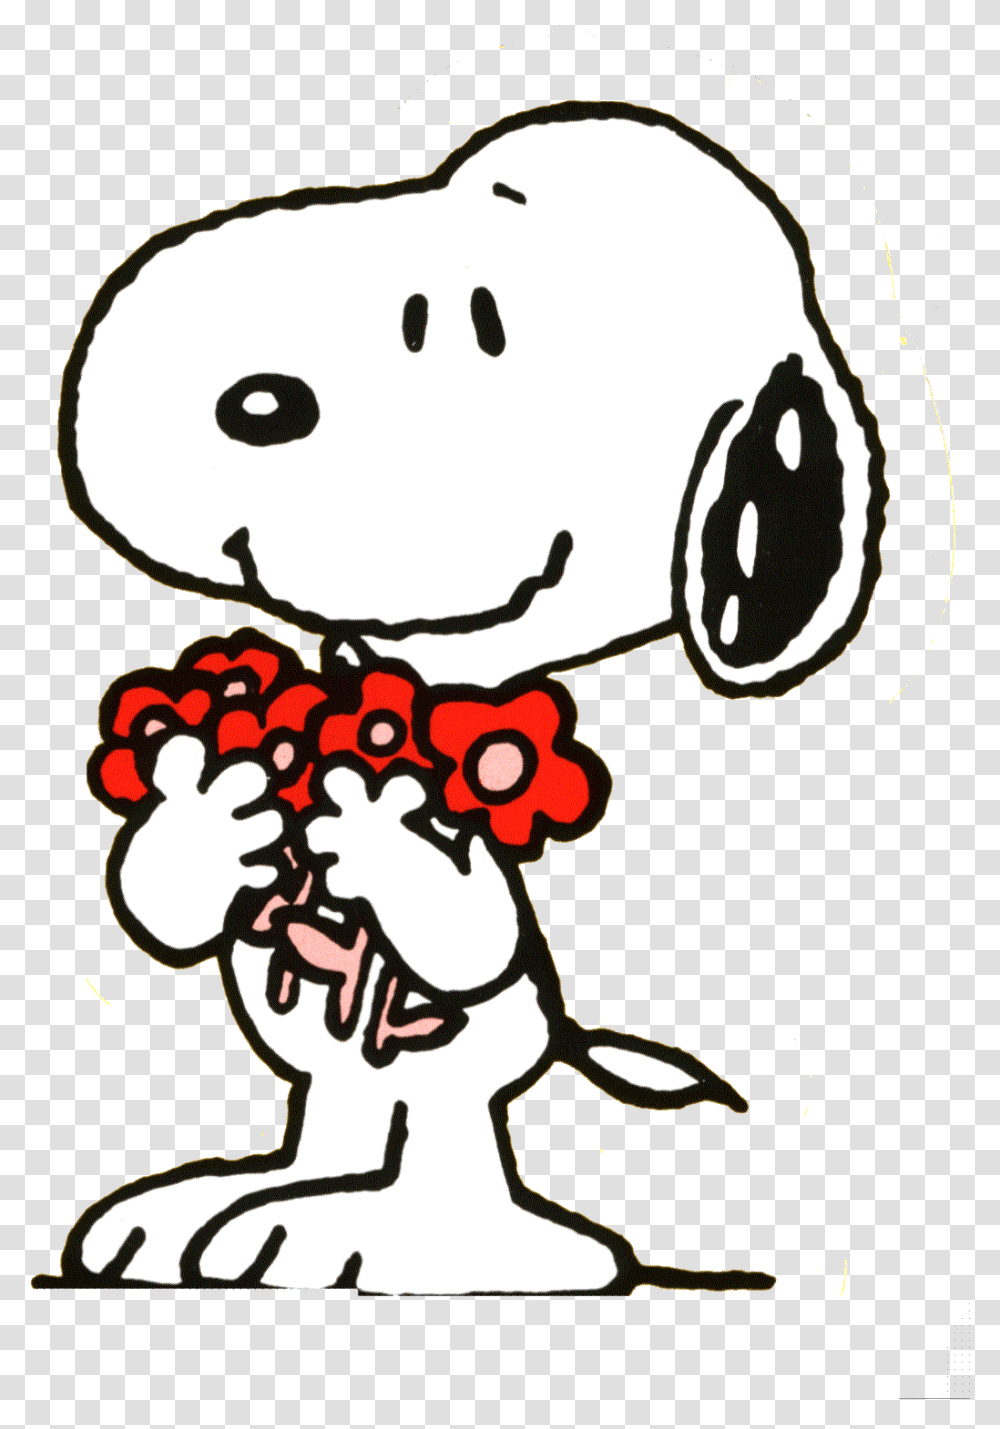 Snoopy Cartoon Hd Background Image For Htc One M9 Cartoons Snoopy Holding Flowers, Hand, Plant, Fruit, Food Transparent Png